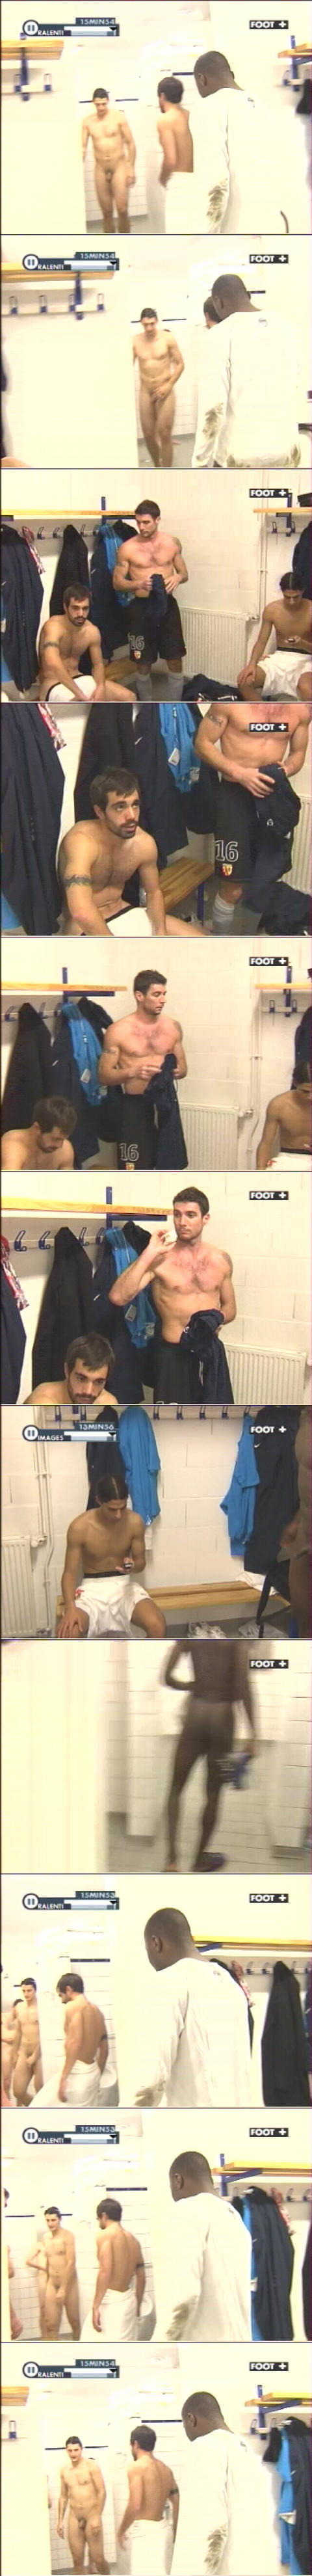 rugby players caught naked in Lens rugby locker room and shower